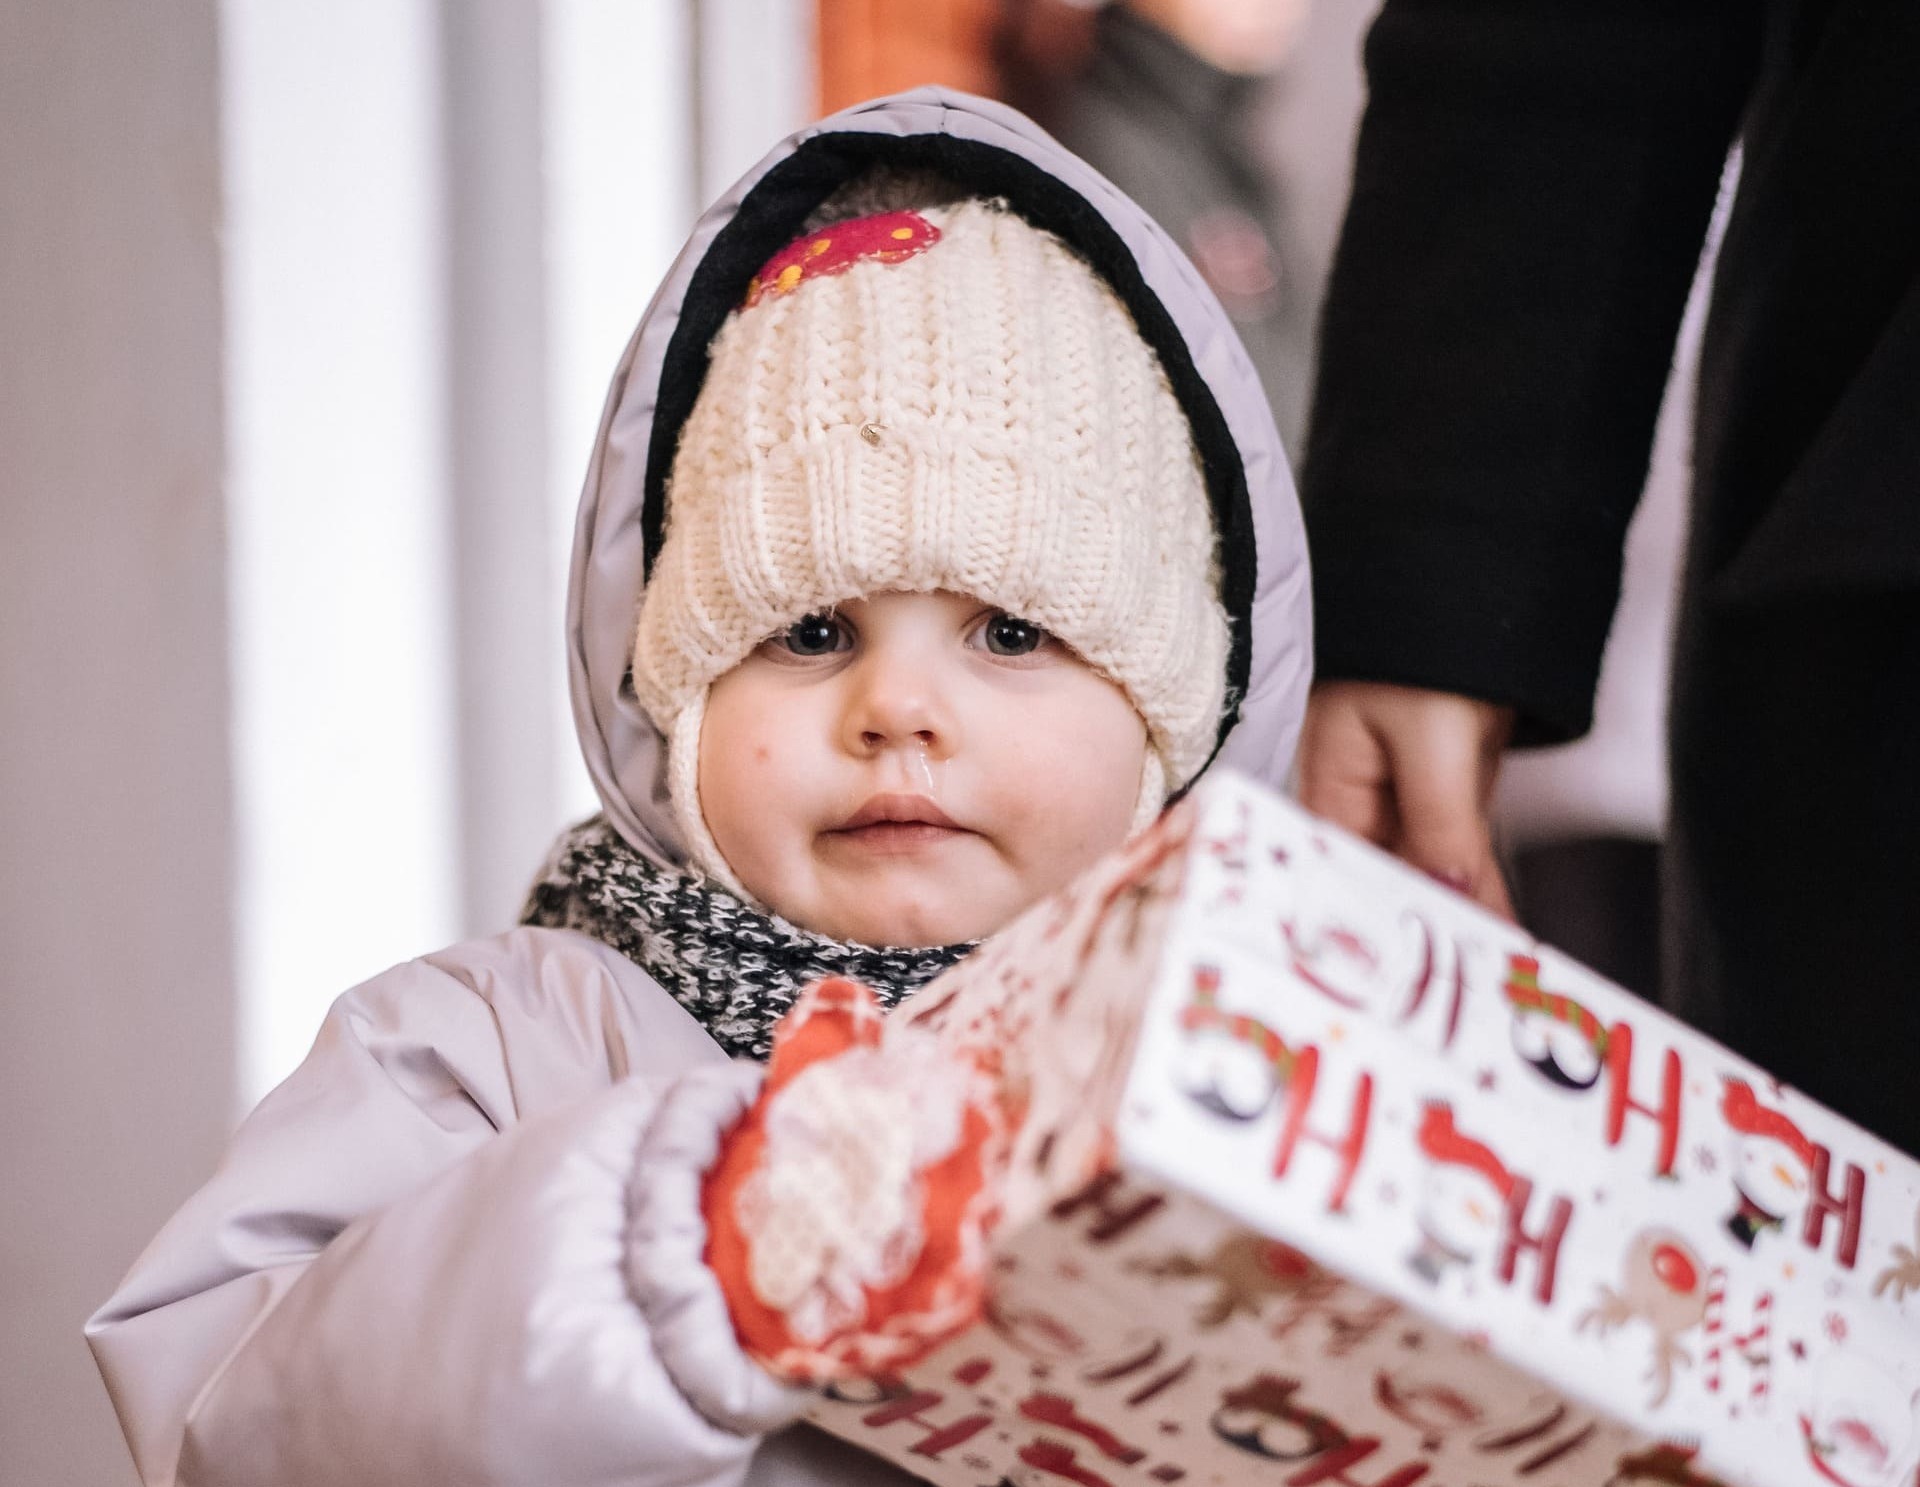 “How to make a village happy in 1 day?” or Humanitarian mission to Devladovo - Rise of Ukraine